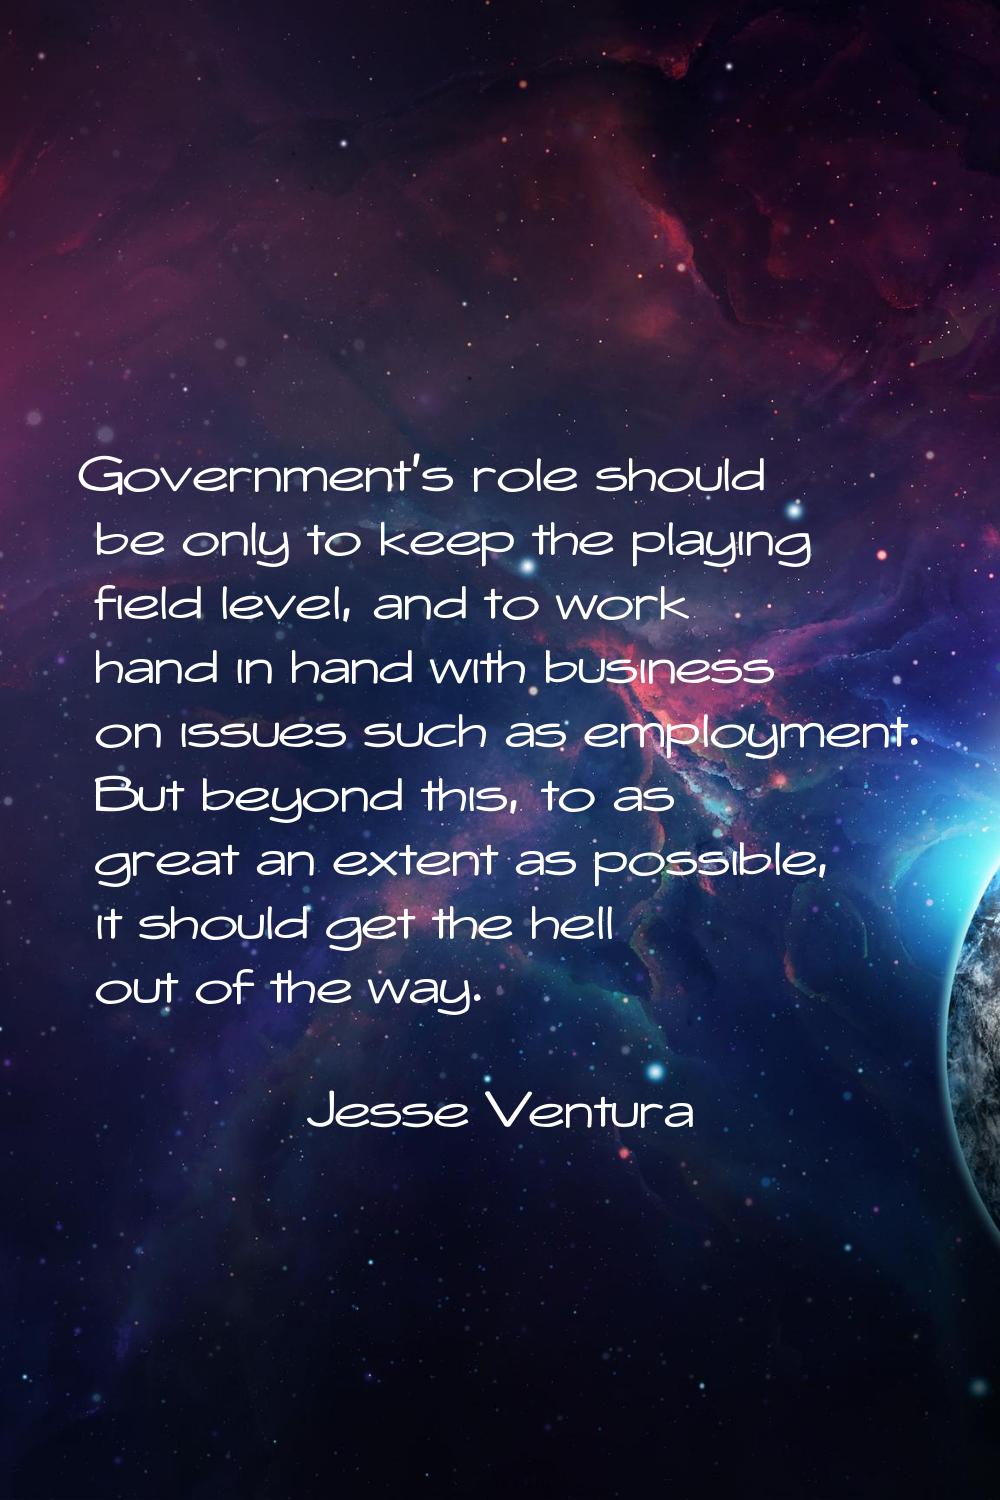 Government's role should be only to keep the playing field level, and to work hand in hand with bus